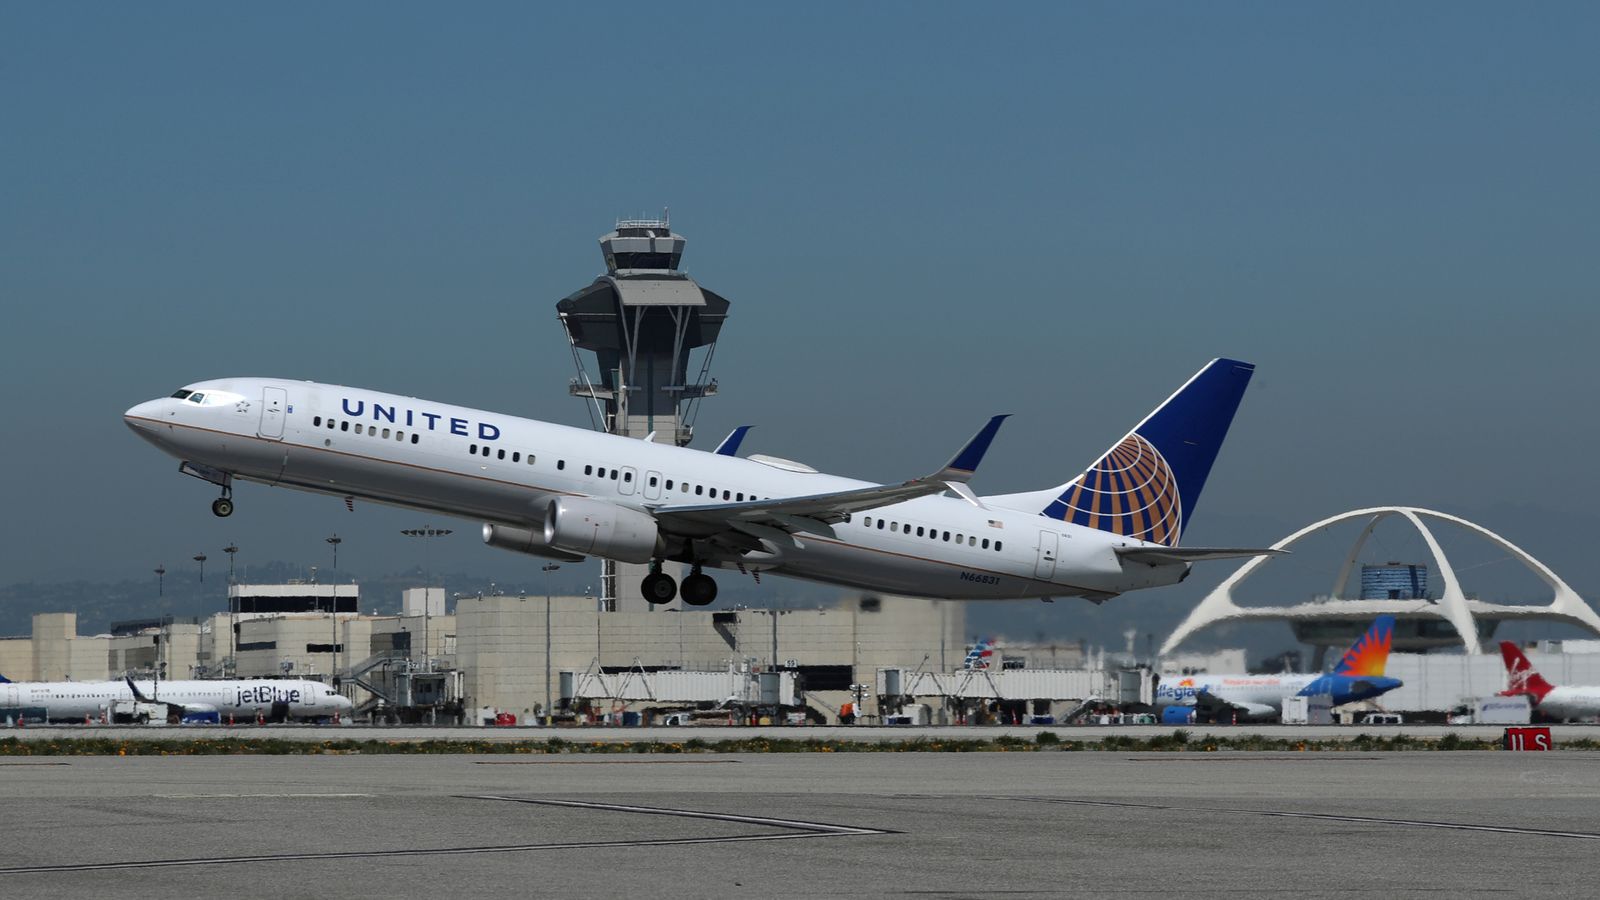 United Airlines Prioritizes Window Seat Boarding for Faster Process